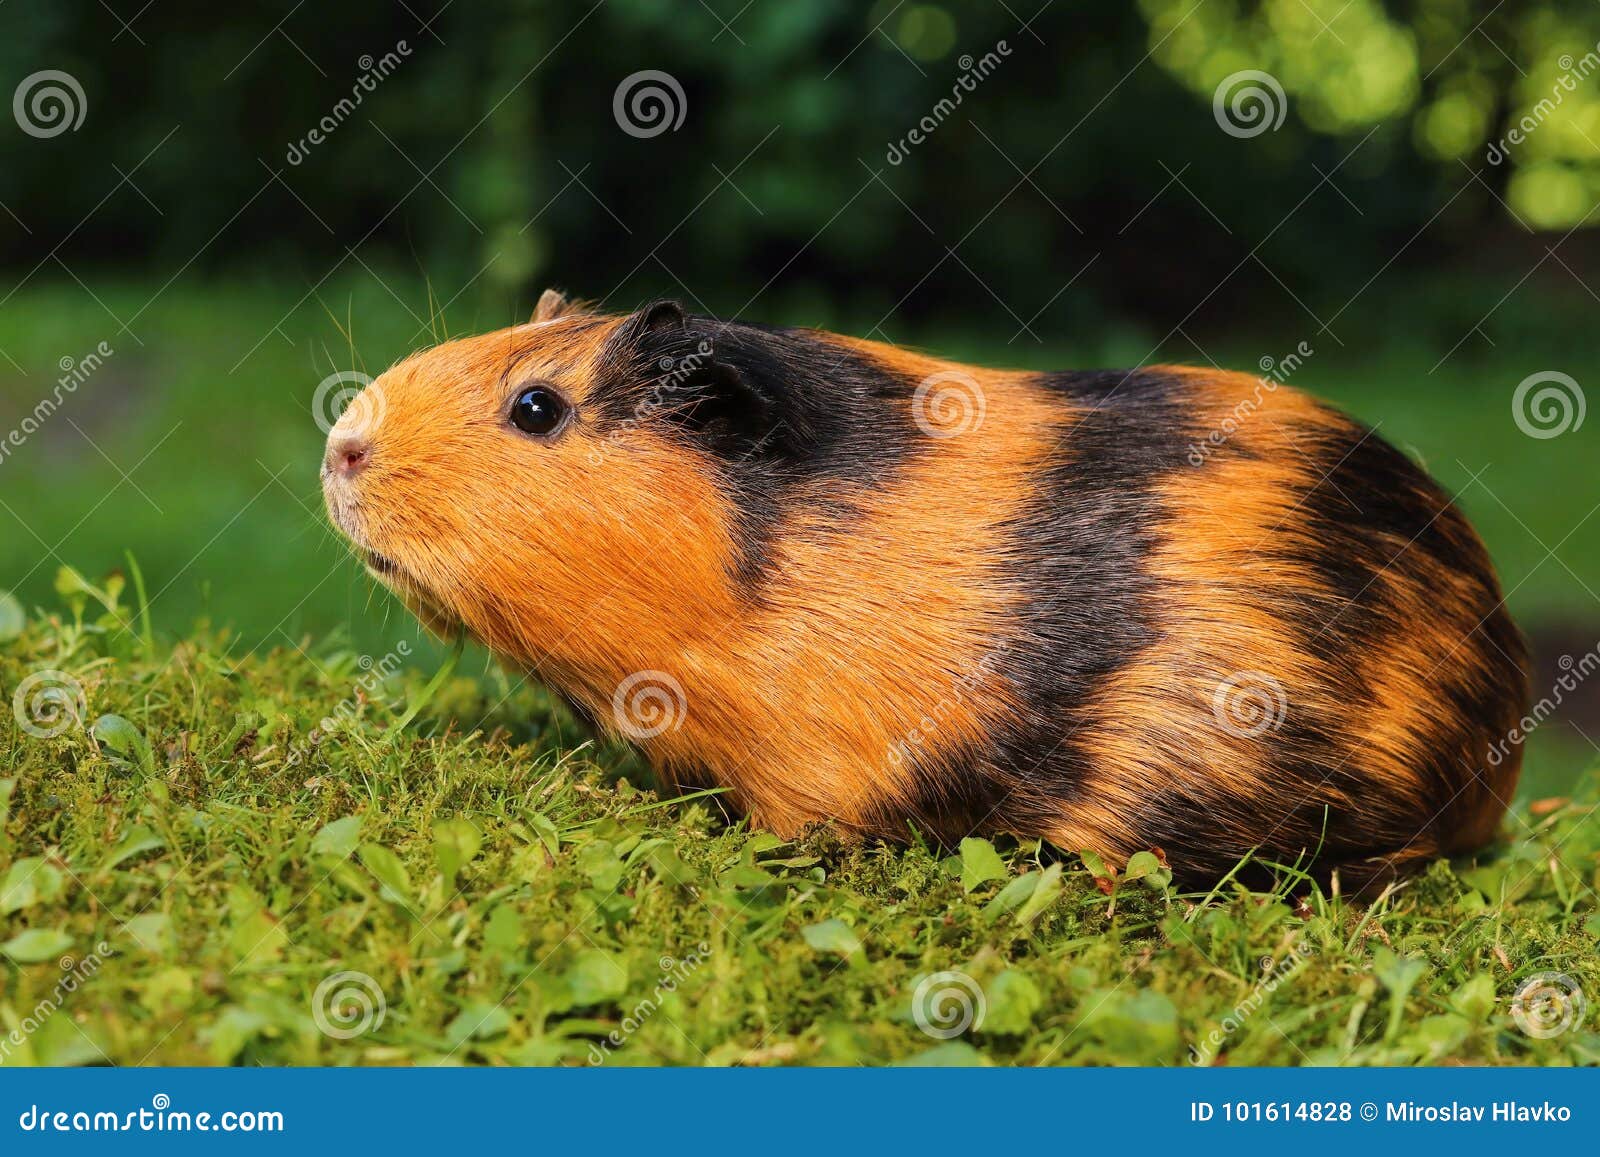 Pig fat guinea Pictured: The